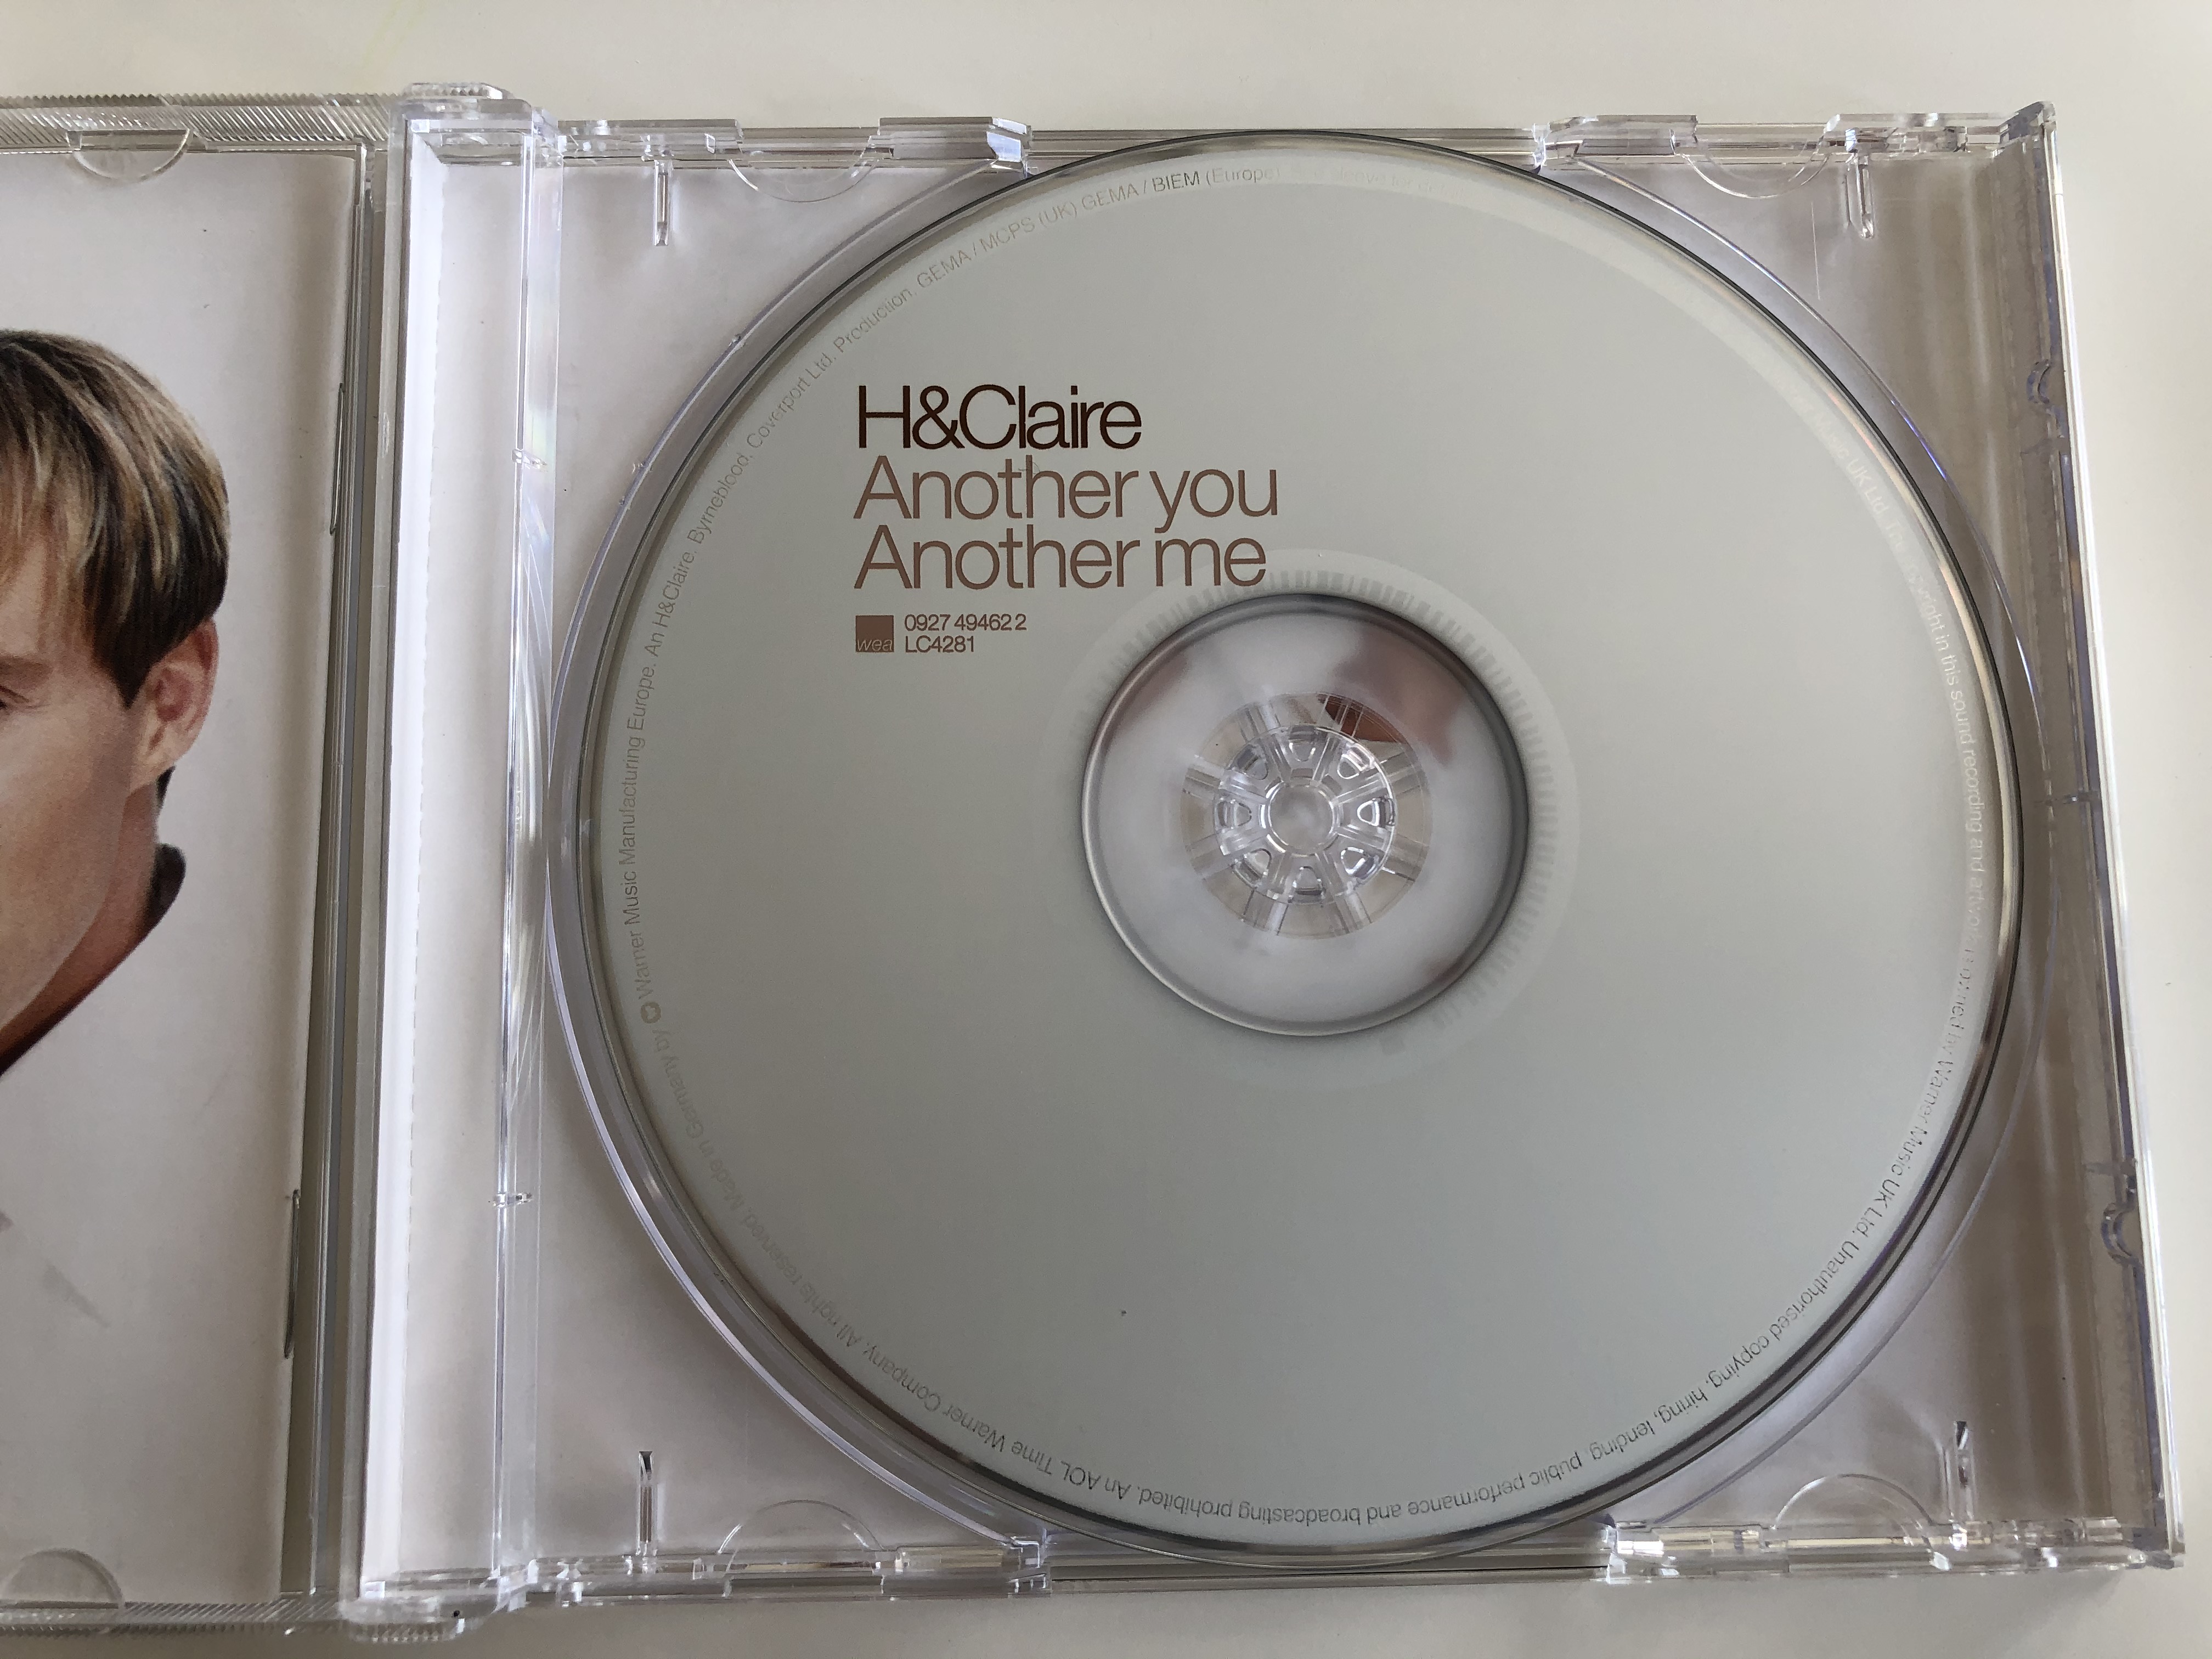 h-claire-another-you-another-me-wea-audio-cd-0927-49462-2-10-.jpg